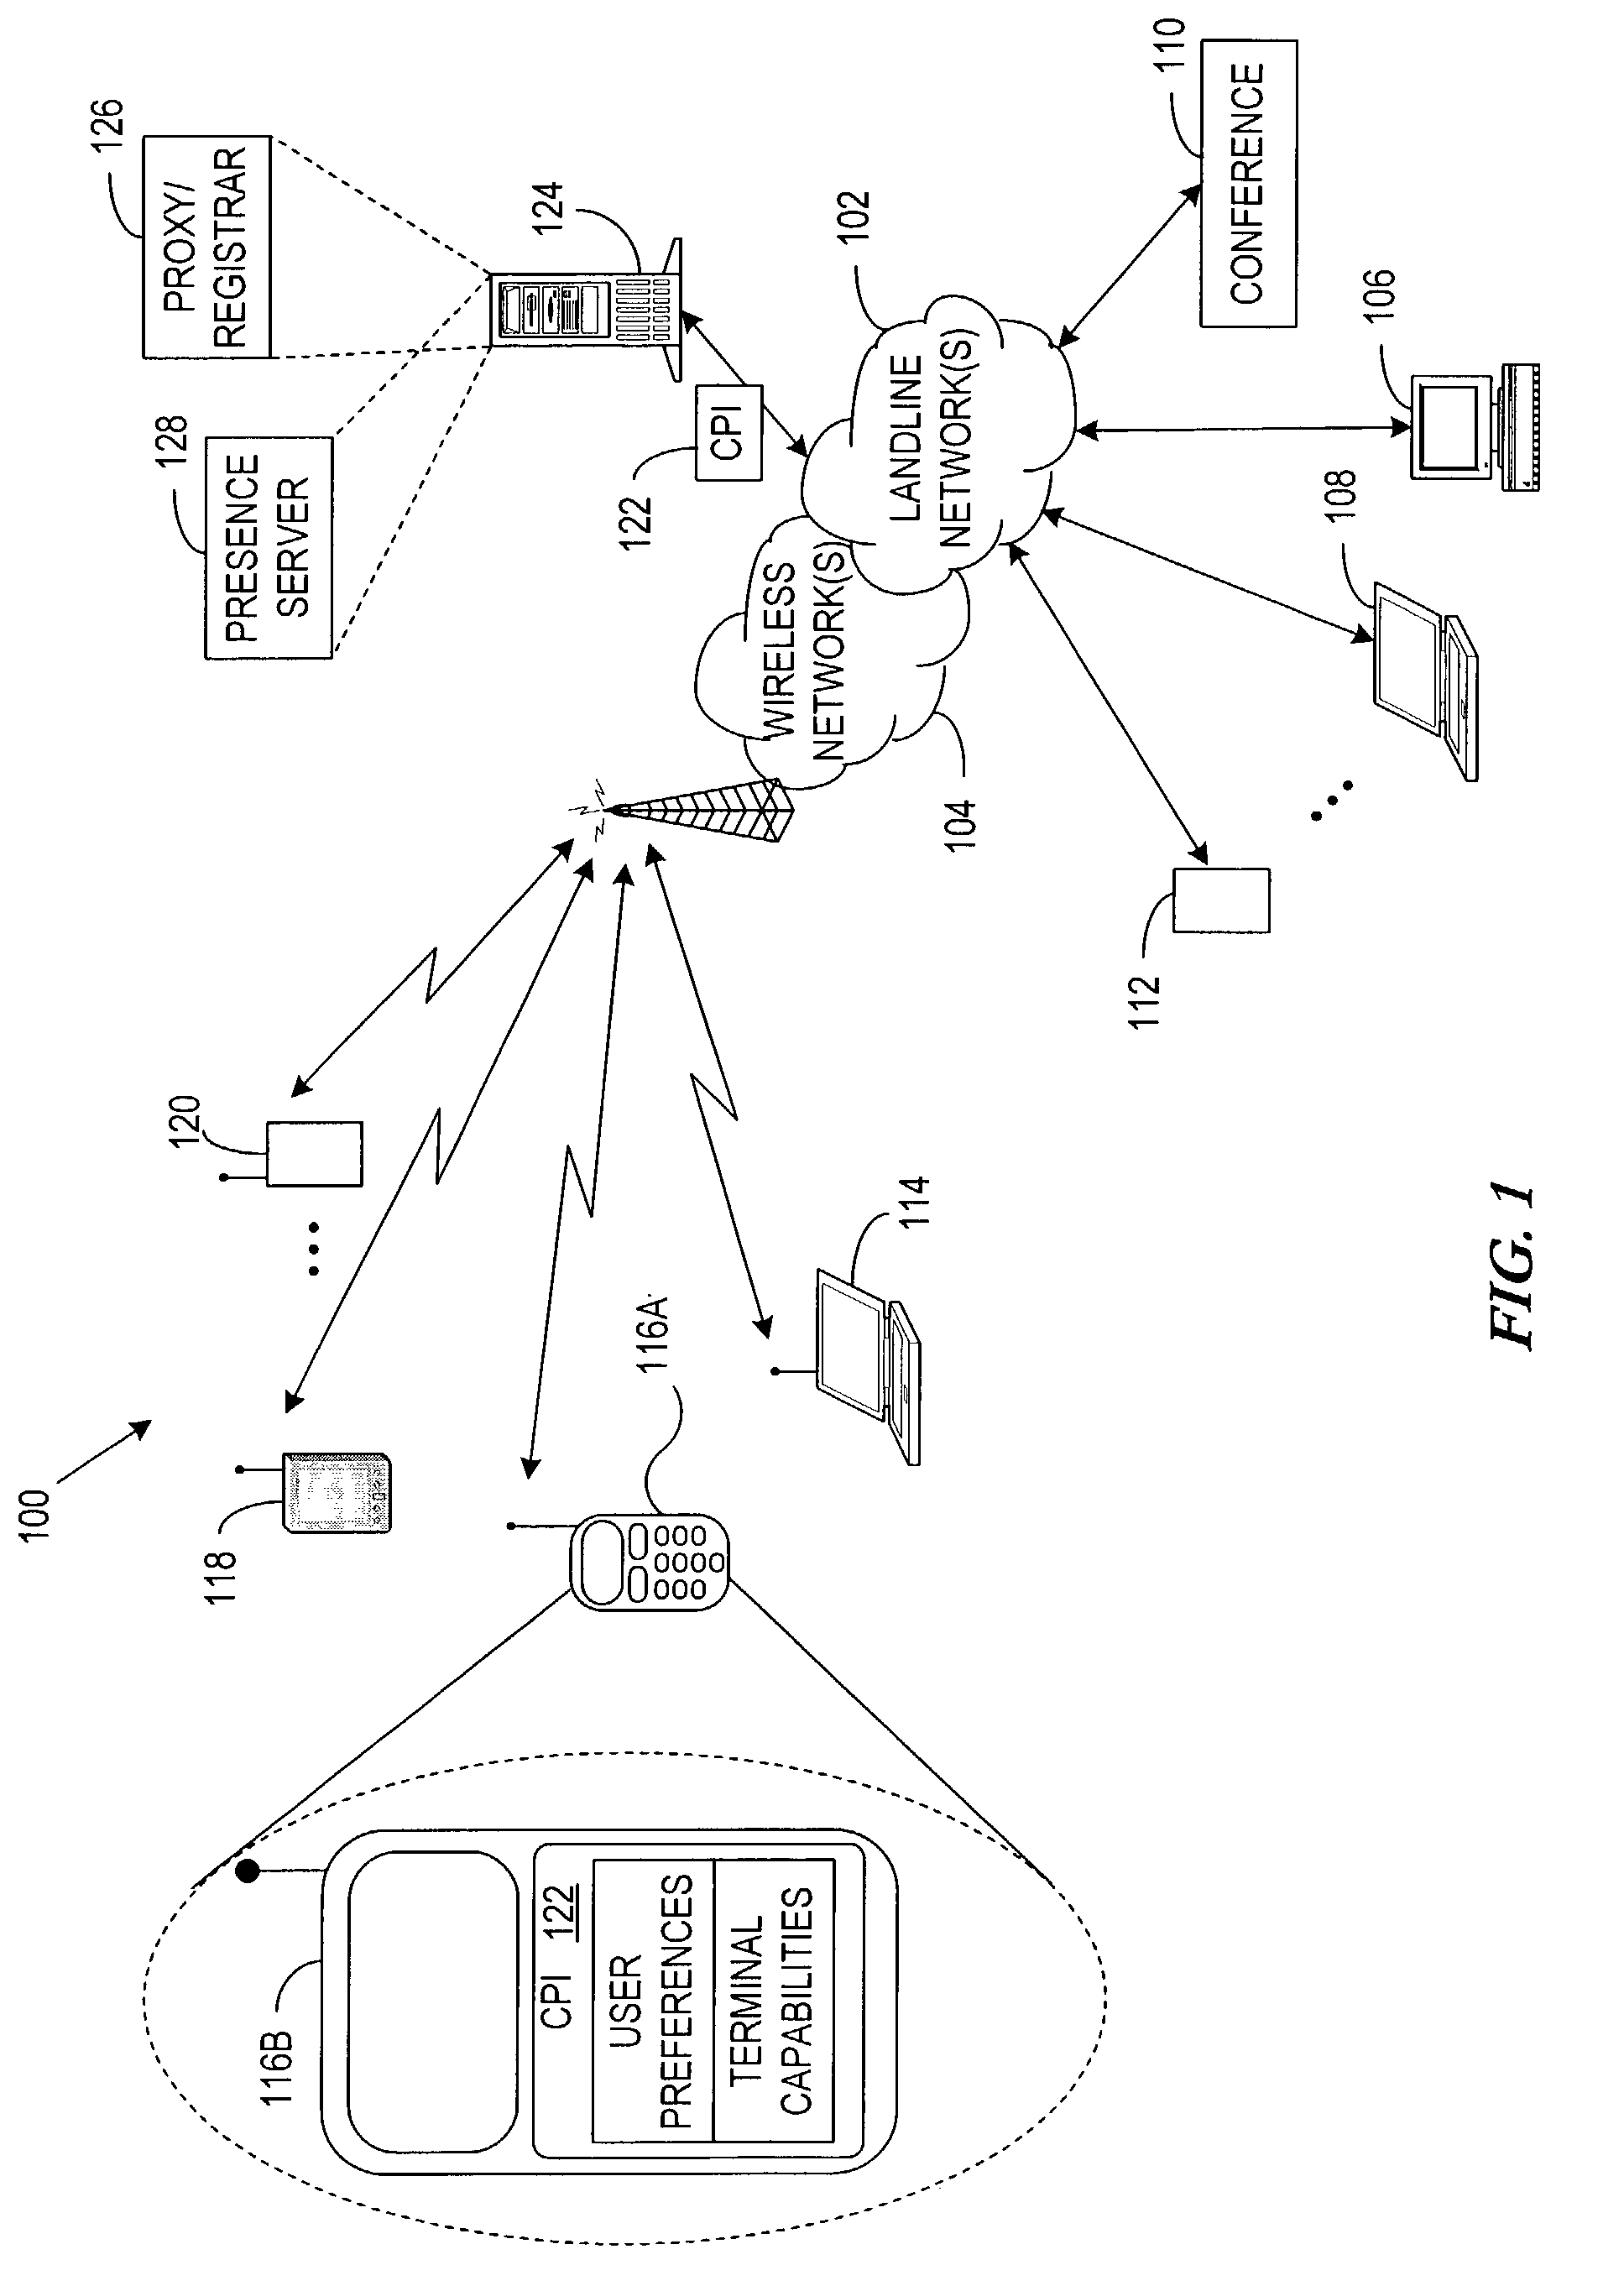 System and method for conveying terminal capability and user preferences-dependent content characteristics for content adaptation